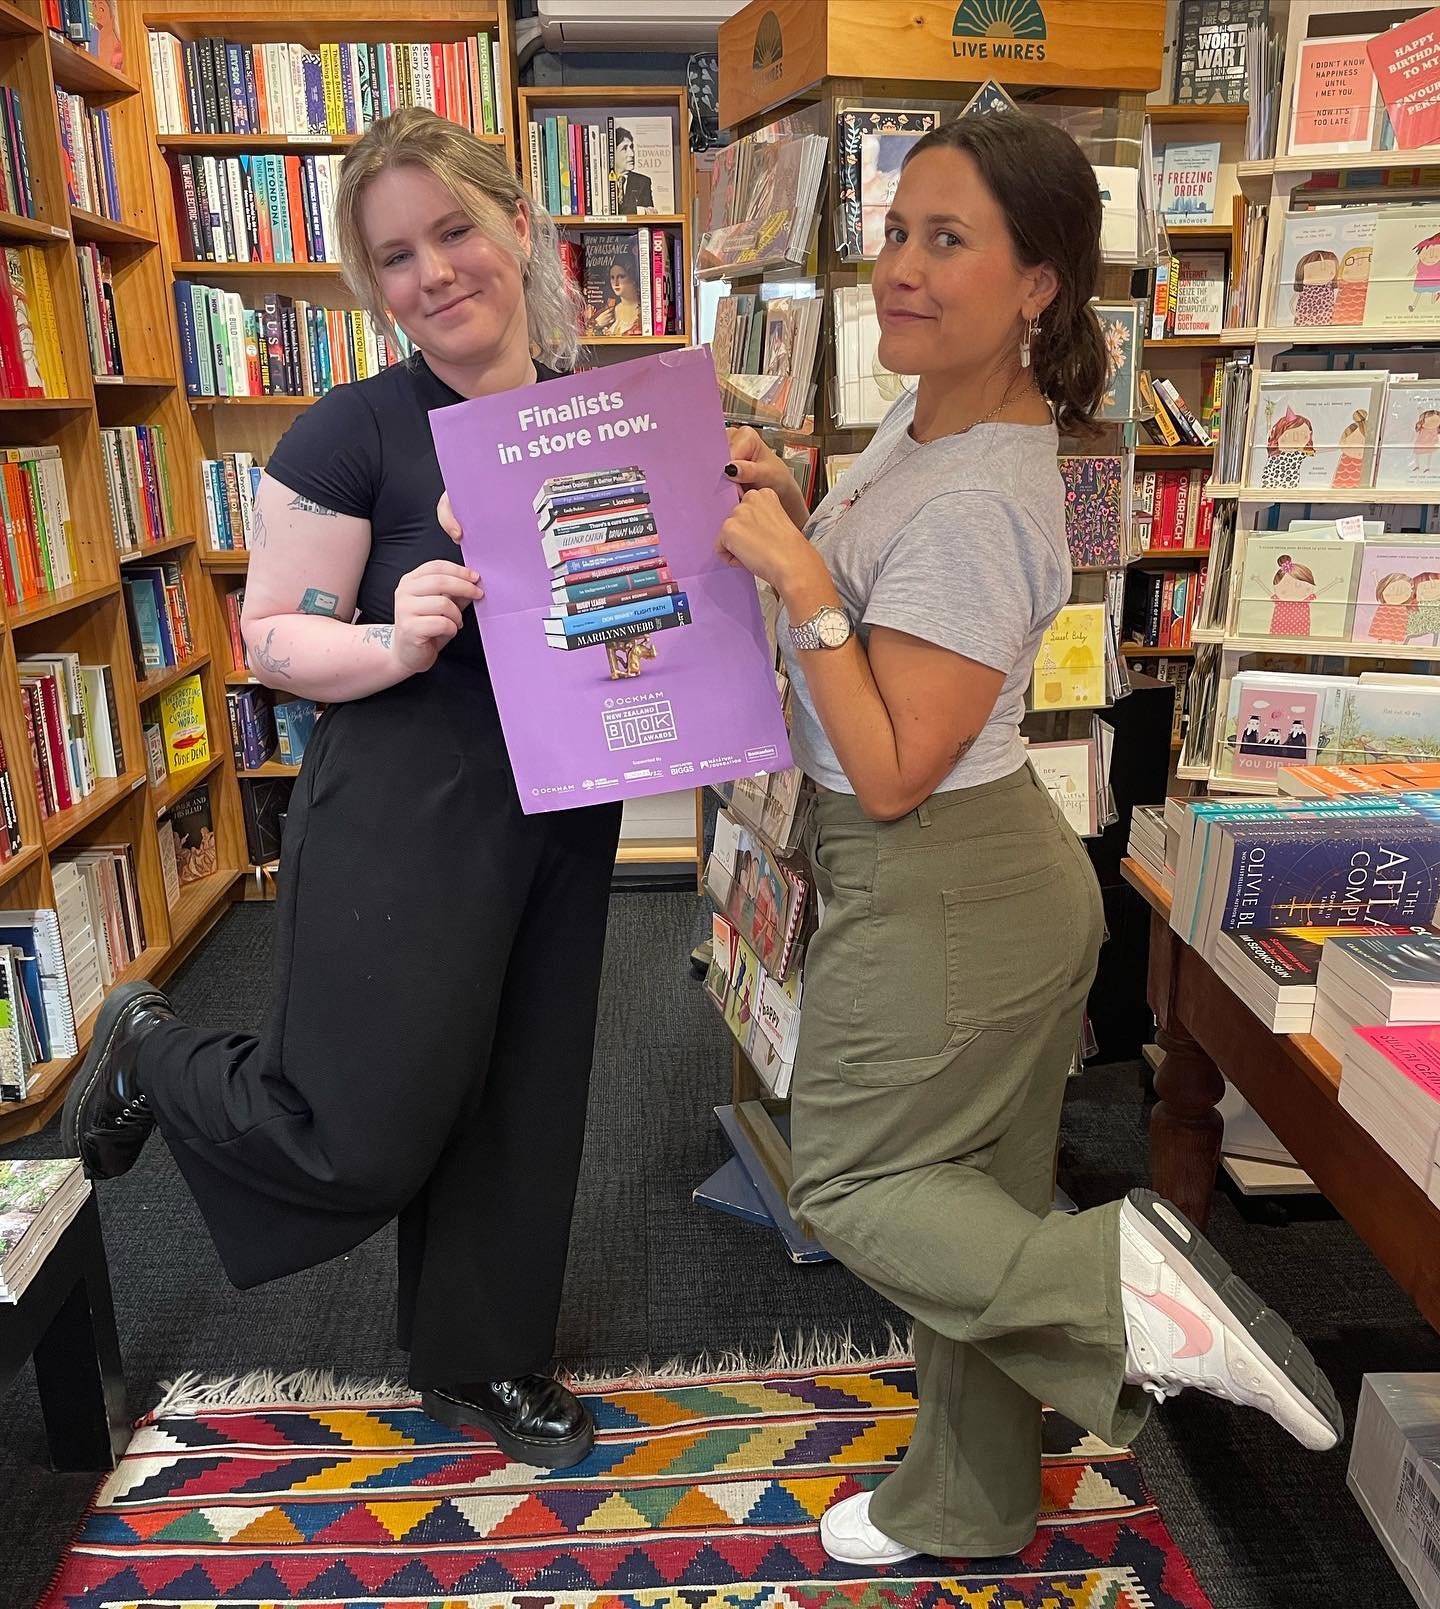 ✨GIVEAWAY✨Your Ockham Fiction Champions, Hollie &amp; Abby, have a double pass to the 2024 Ockham NZ Book Awards to giveaway! 📚

To enter the draw, make sure you&rsquo;re following us and @newzealandbookawards then simply tag a friend you&rsquo;d li